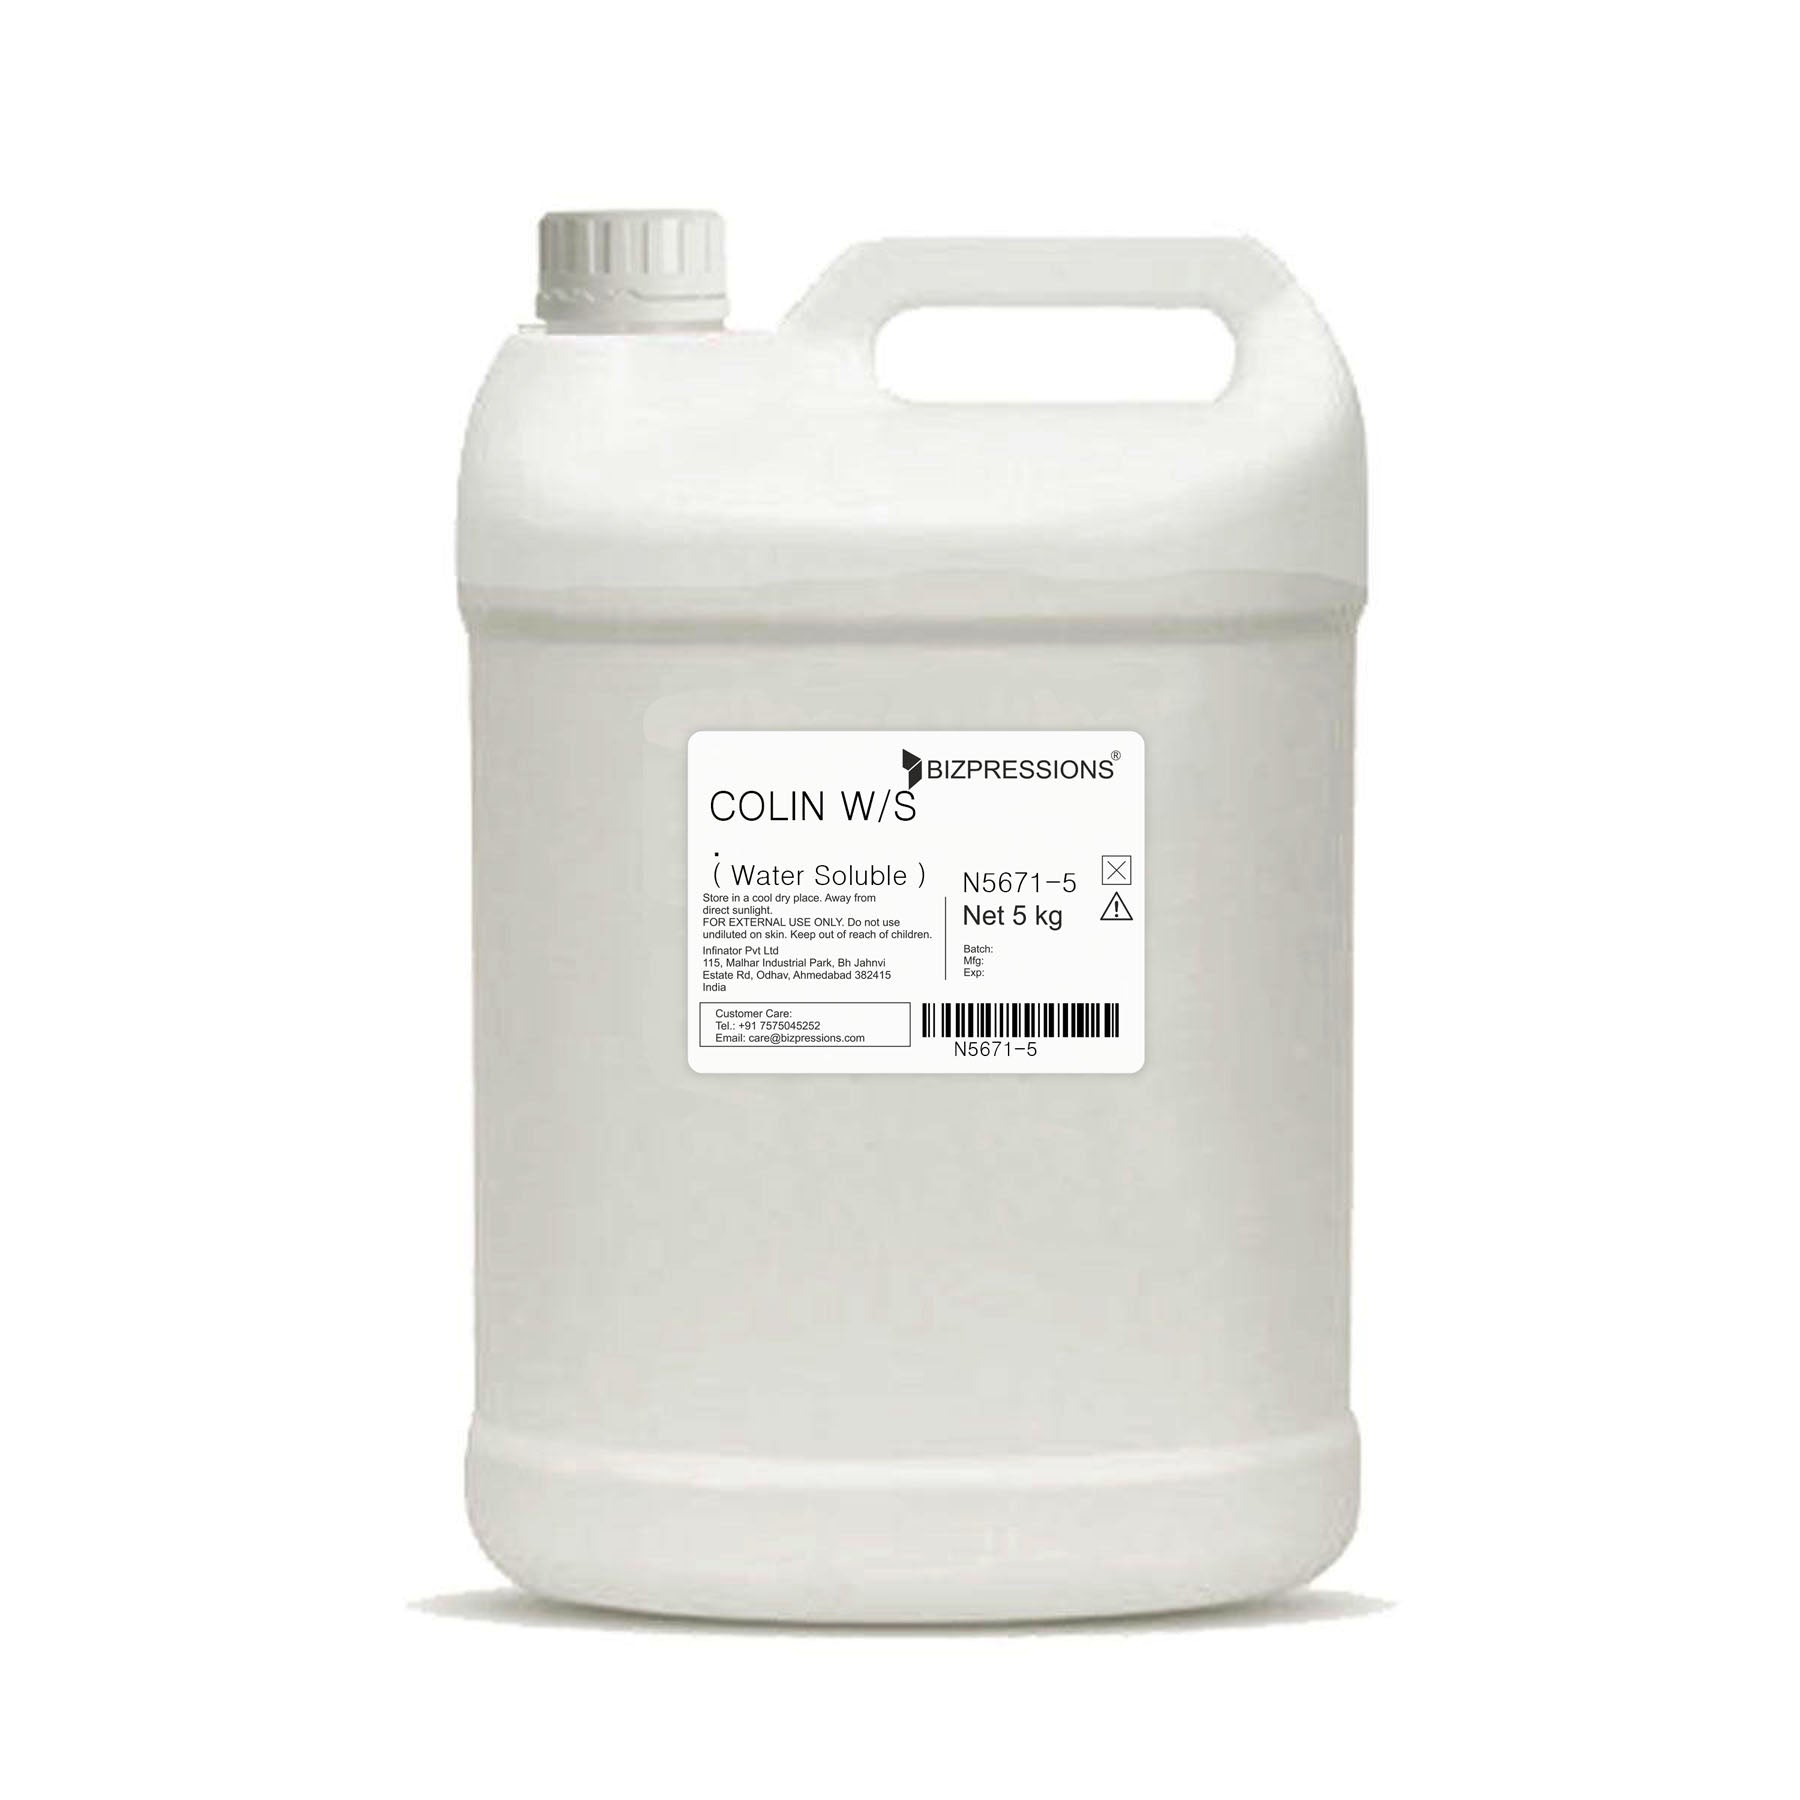 COLIN W/S - Fragrance ( Water Soluble ) - 5 kg